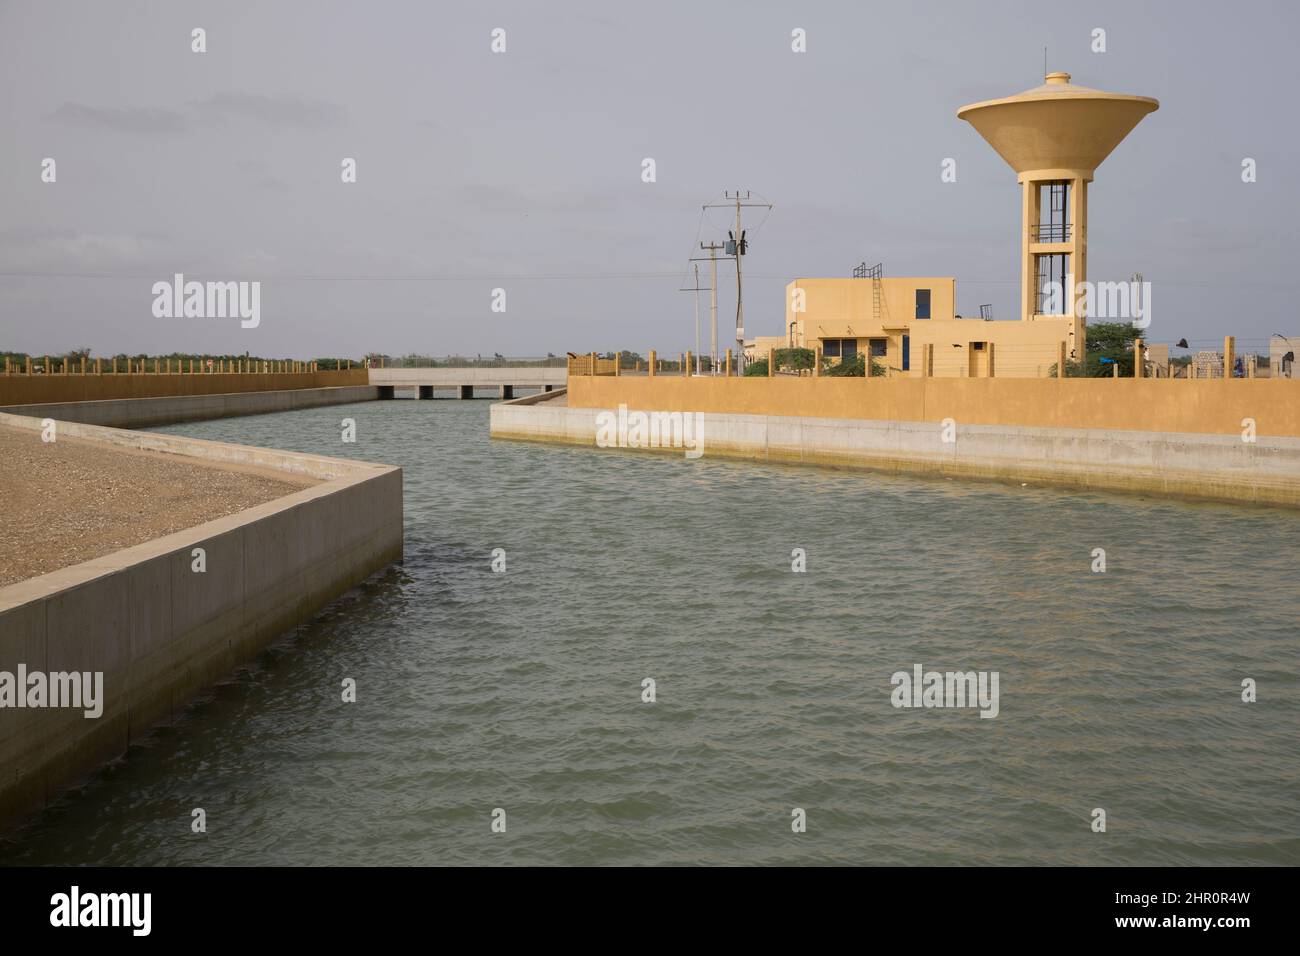 The Diama station is part of new irrigation infrastructure built in the Senegal River Delta by MCC to help farmers irrigate their farmland. Stock Photo